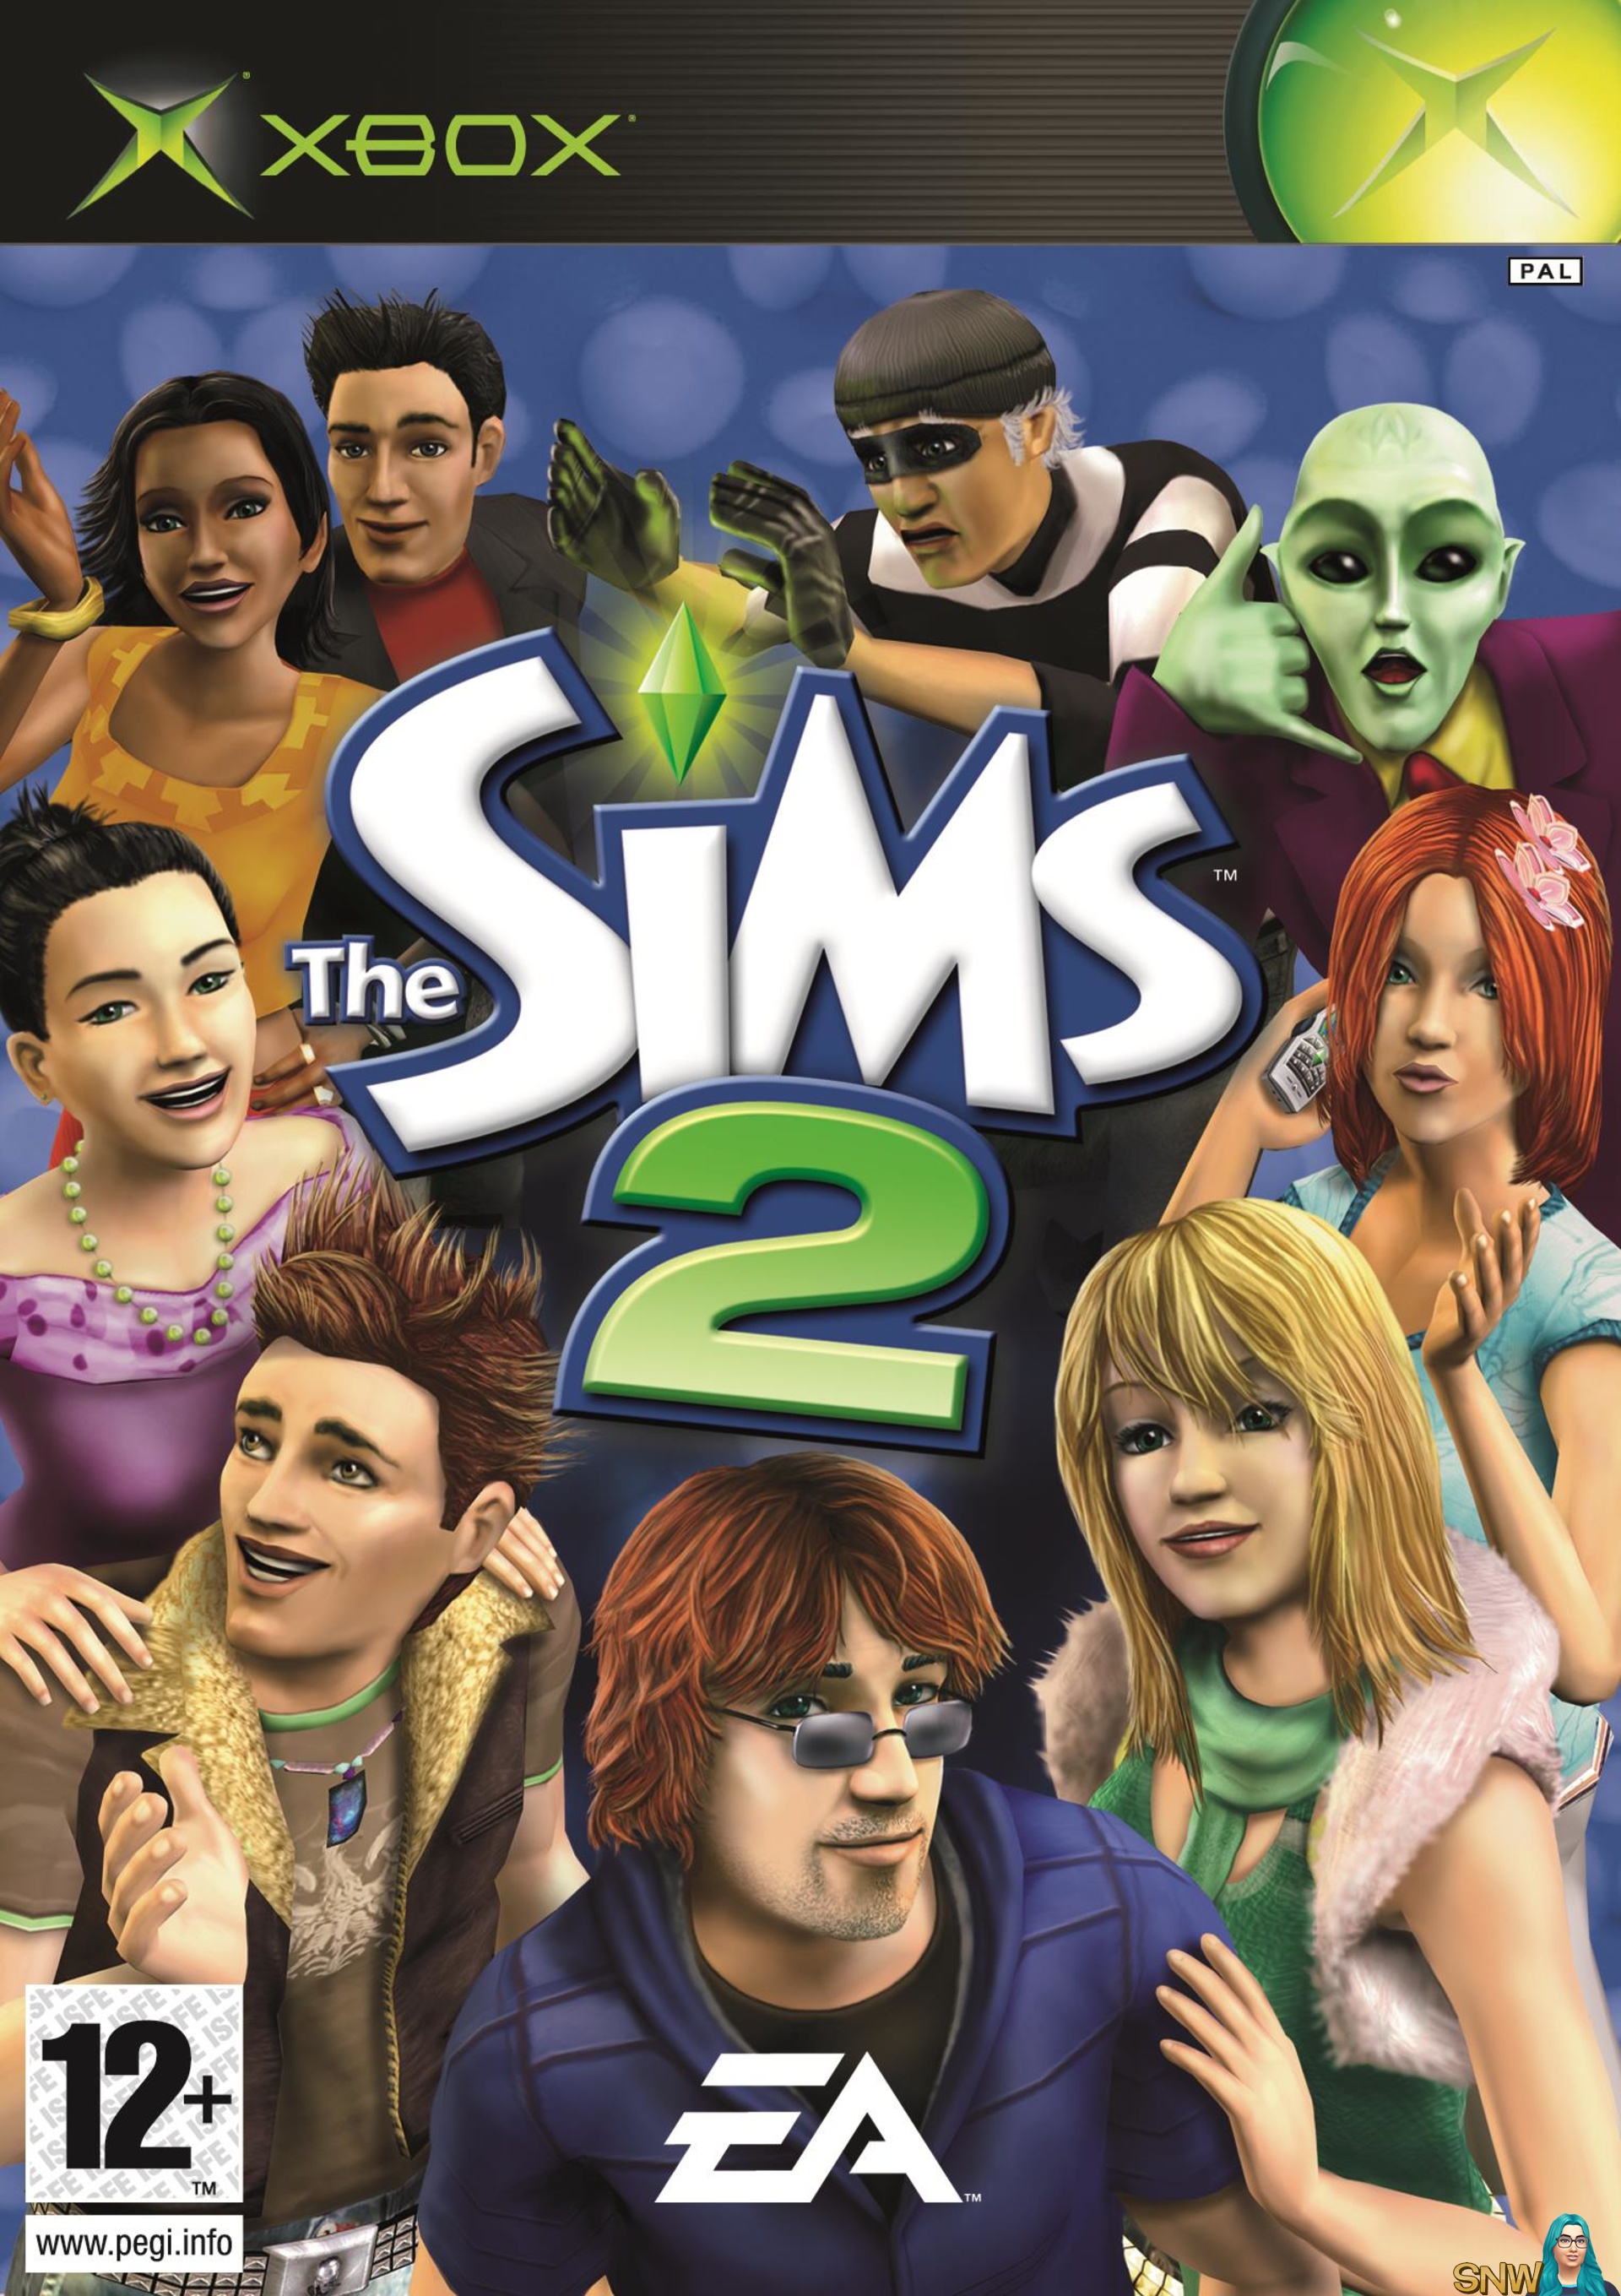 Game sims 2. Симс 2 ps2. The SIMS 2 2004. The SIMS 2 (для игровых приставок). SIMS 2 Постер.